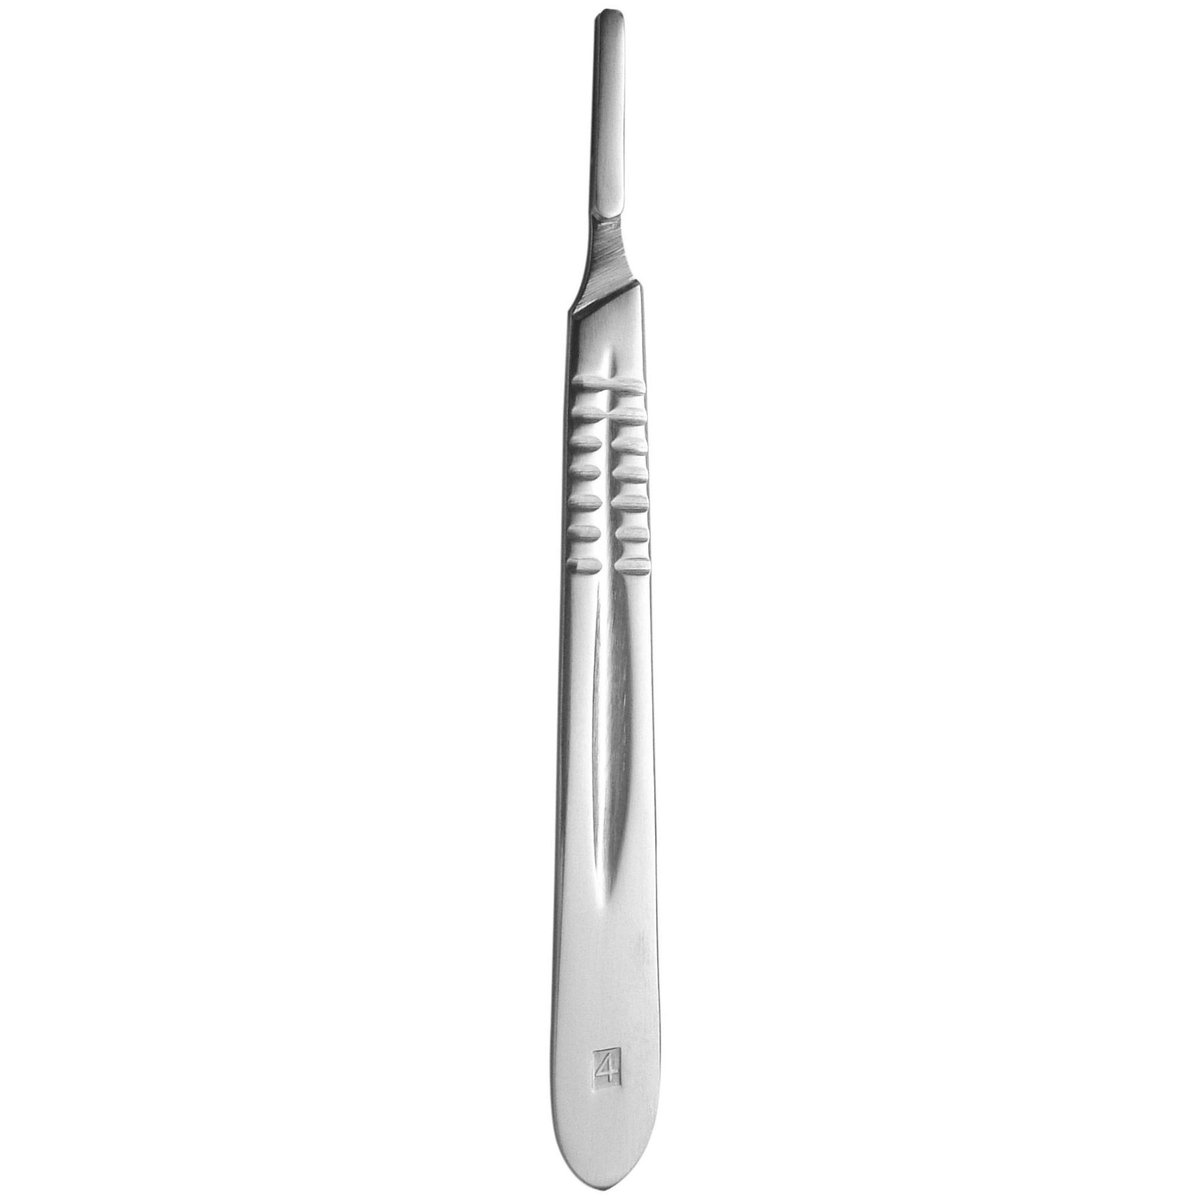 Scalpel Handle 4
#talhabrothers #scalpelhandle #surgicalinstruments #WeAreMedline #surgicalsupplies #surgeryhospital #makers #retailservices #b2b #medicalequipment #surgeontools #surgerytools #surgicaltools #surgicalinstrument #precisionmatters #stainlesssteel #sterile #healthcar